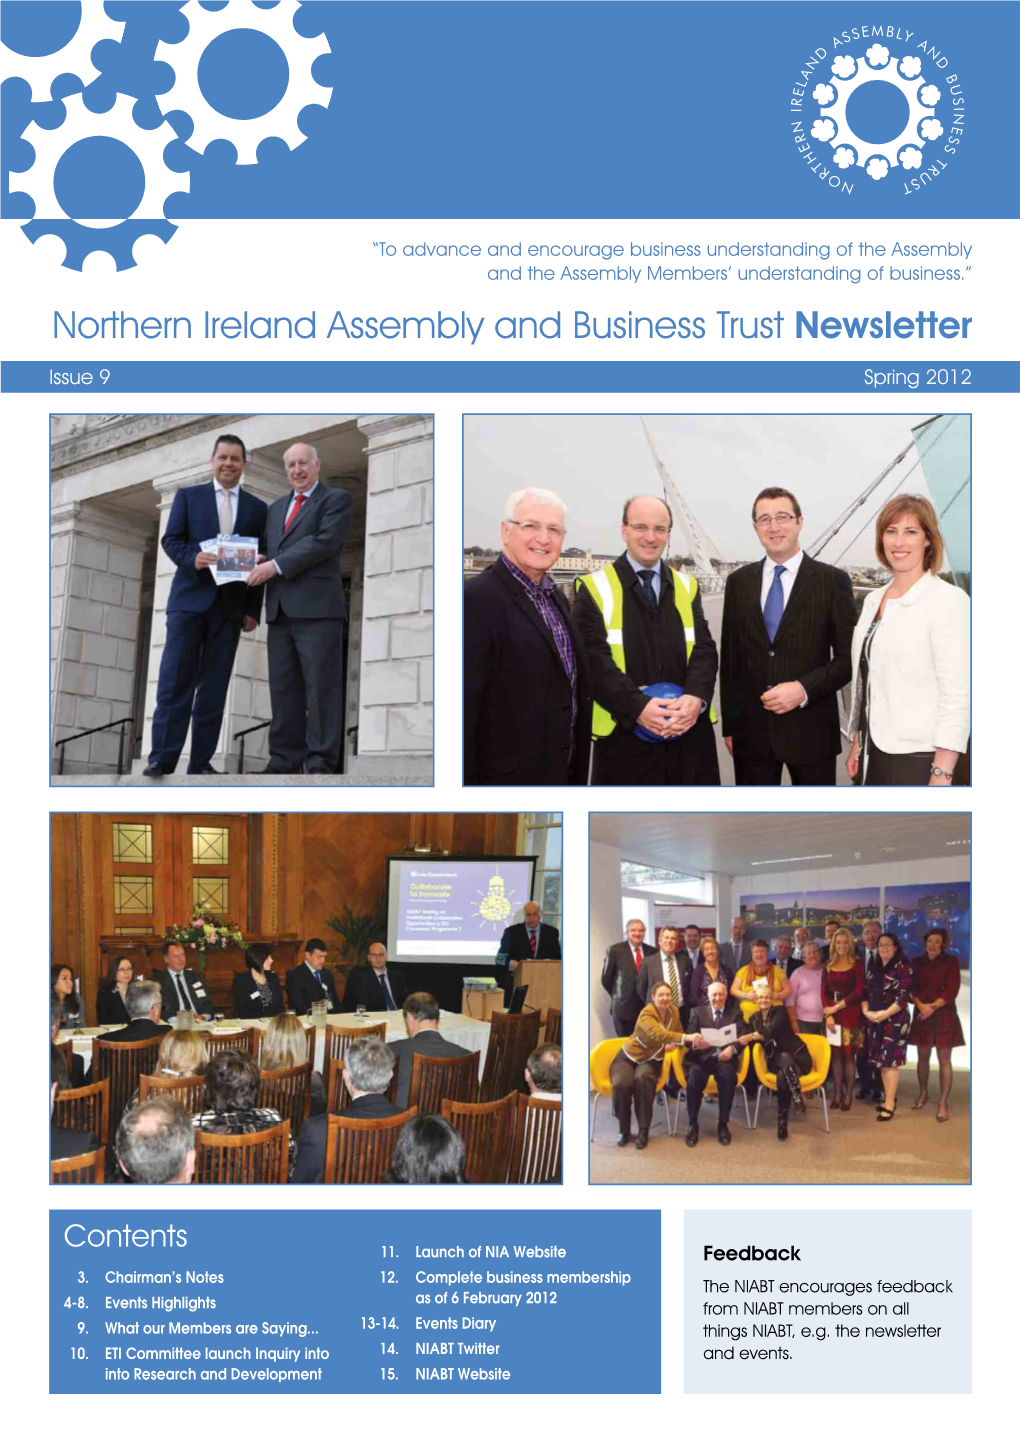 Northern Ireland Assembly and Business Trust Newsletter